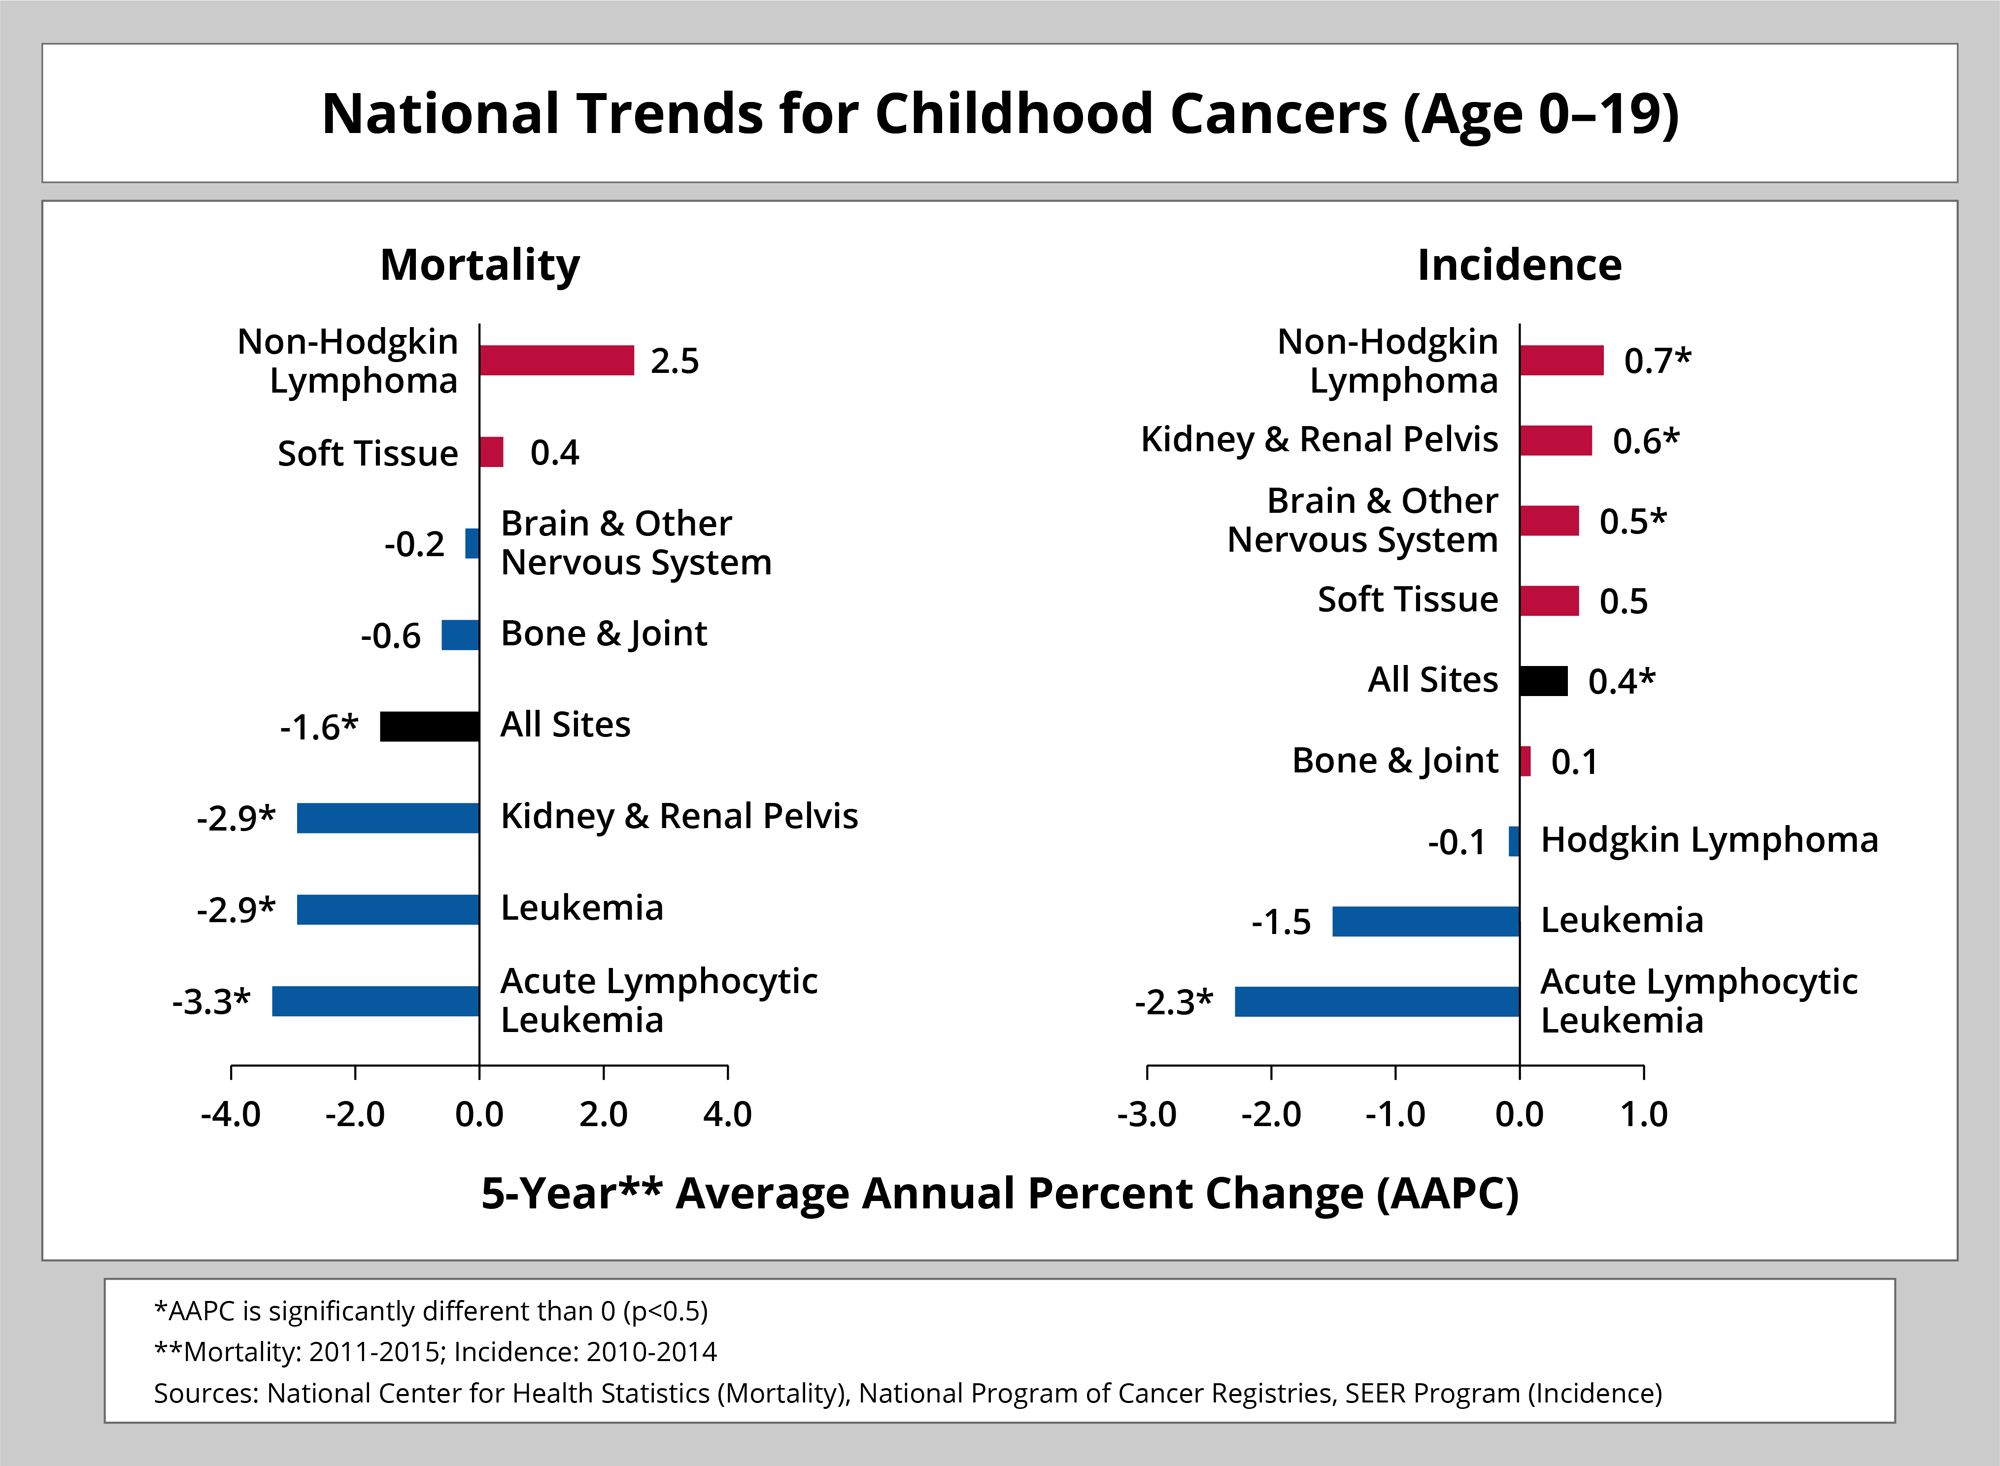 National Trends for Childhood Cancers (Age 0-19). 5-Year** Average Annual Precent Change (AAPC)